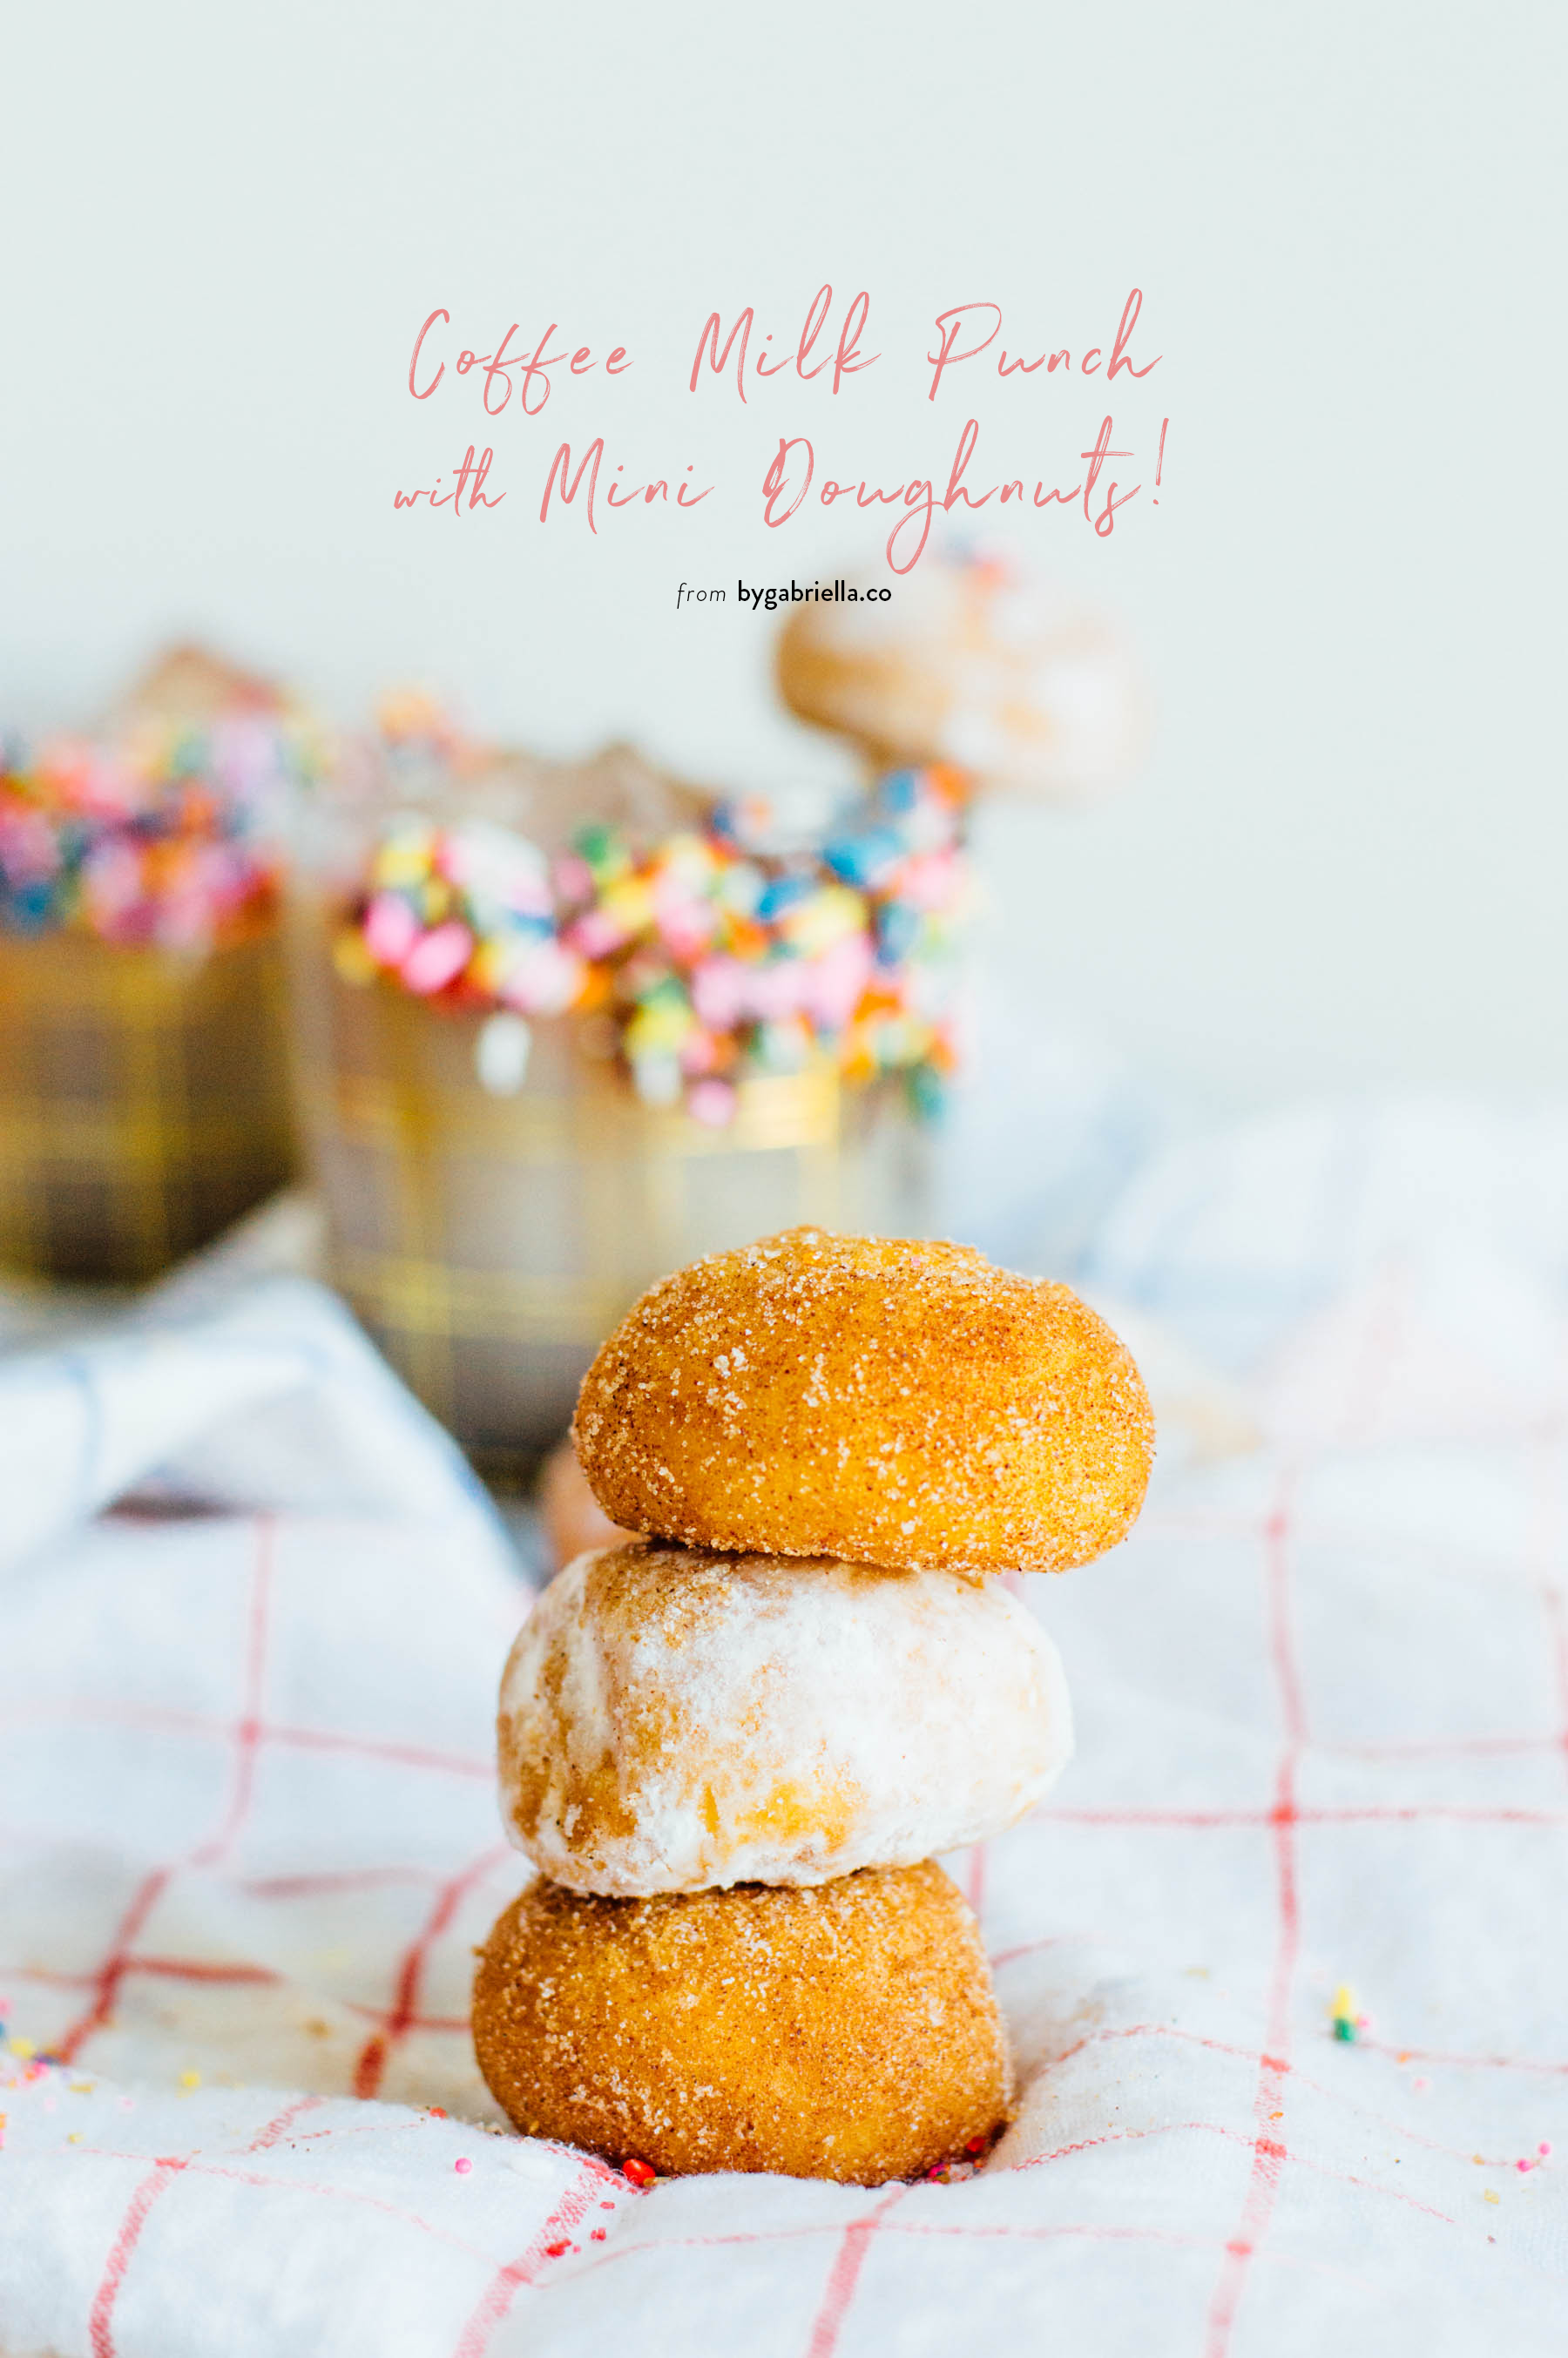 Coffee Milk Punch with coffee tequila and mini doughnuts on the side | bygabriella.co